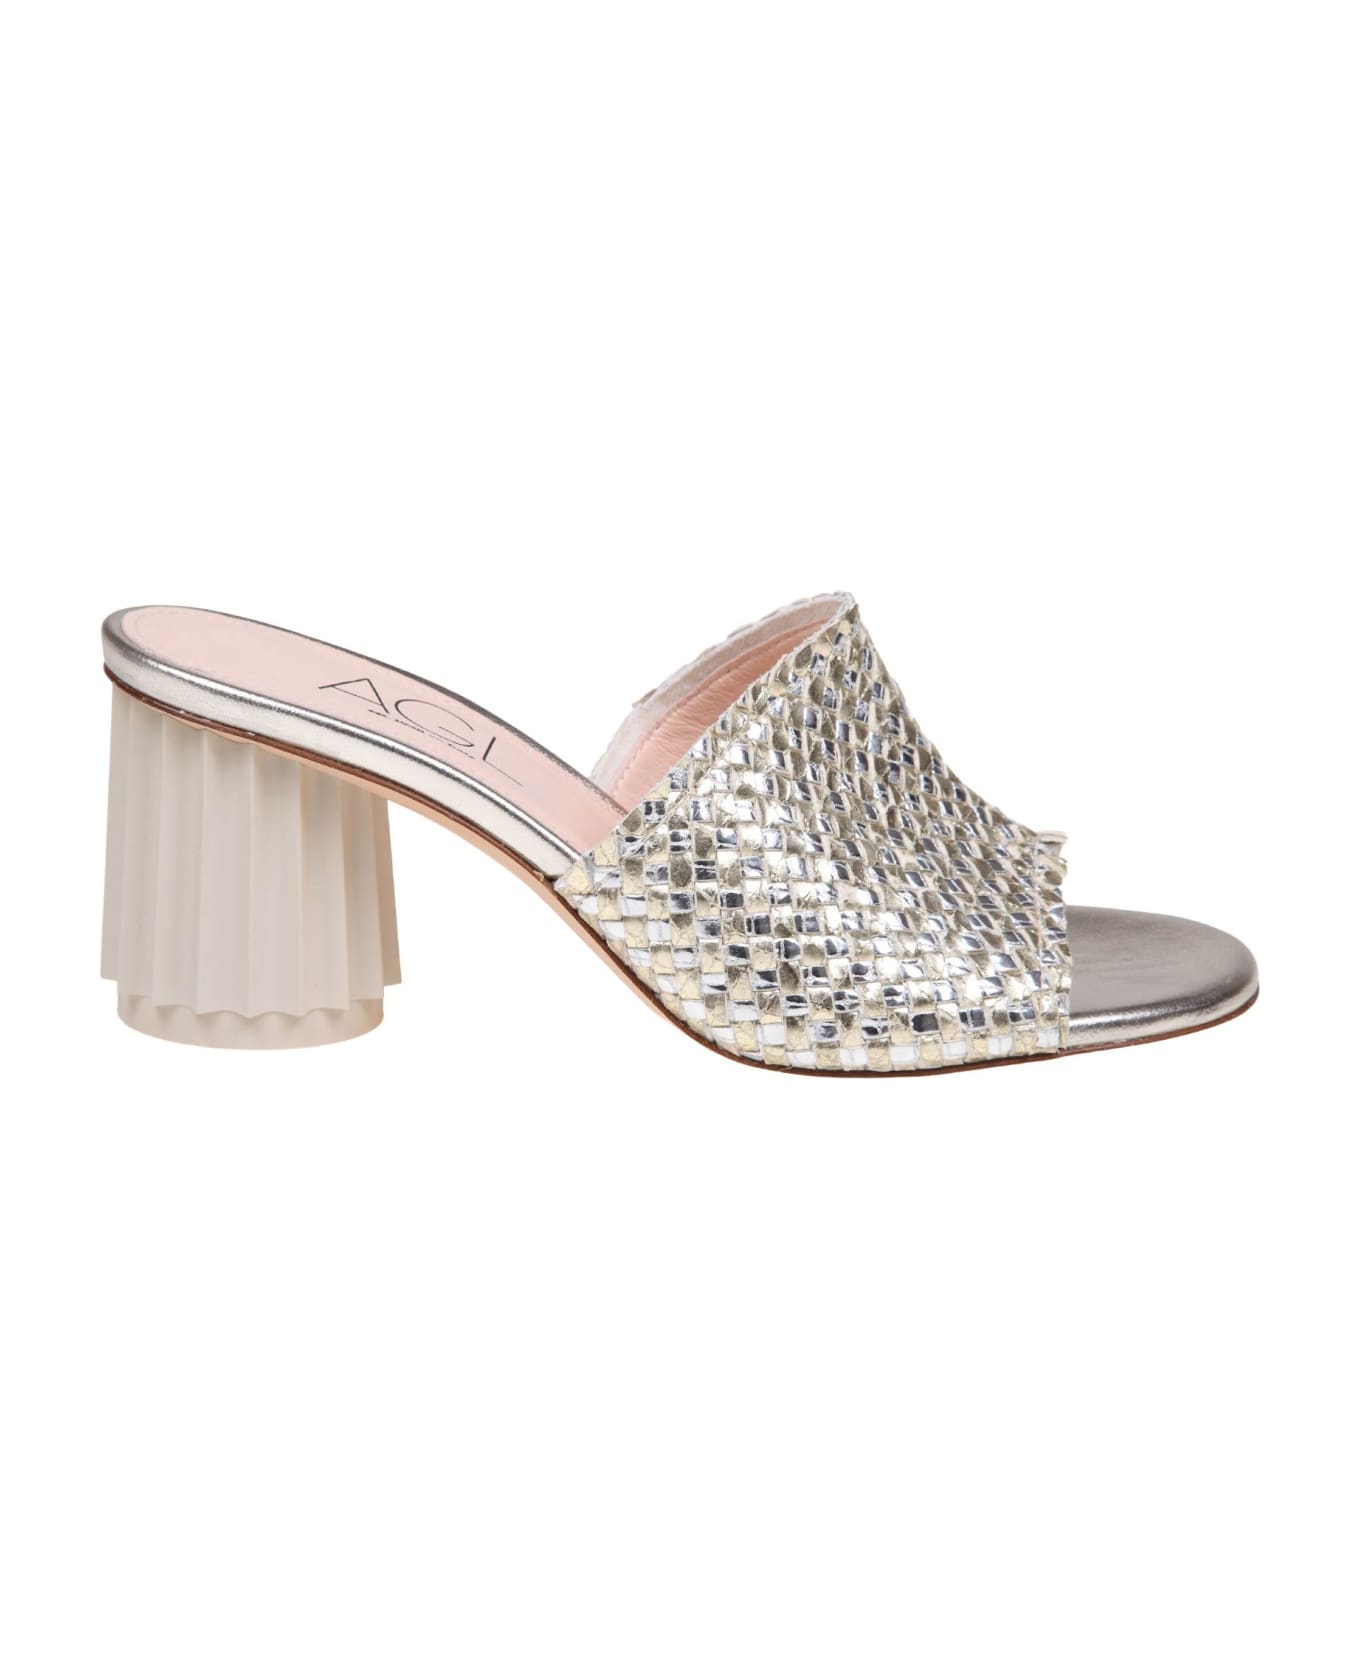 AGL Dorica Slides In Silver And Gold Woven Leather - Silver